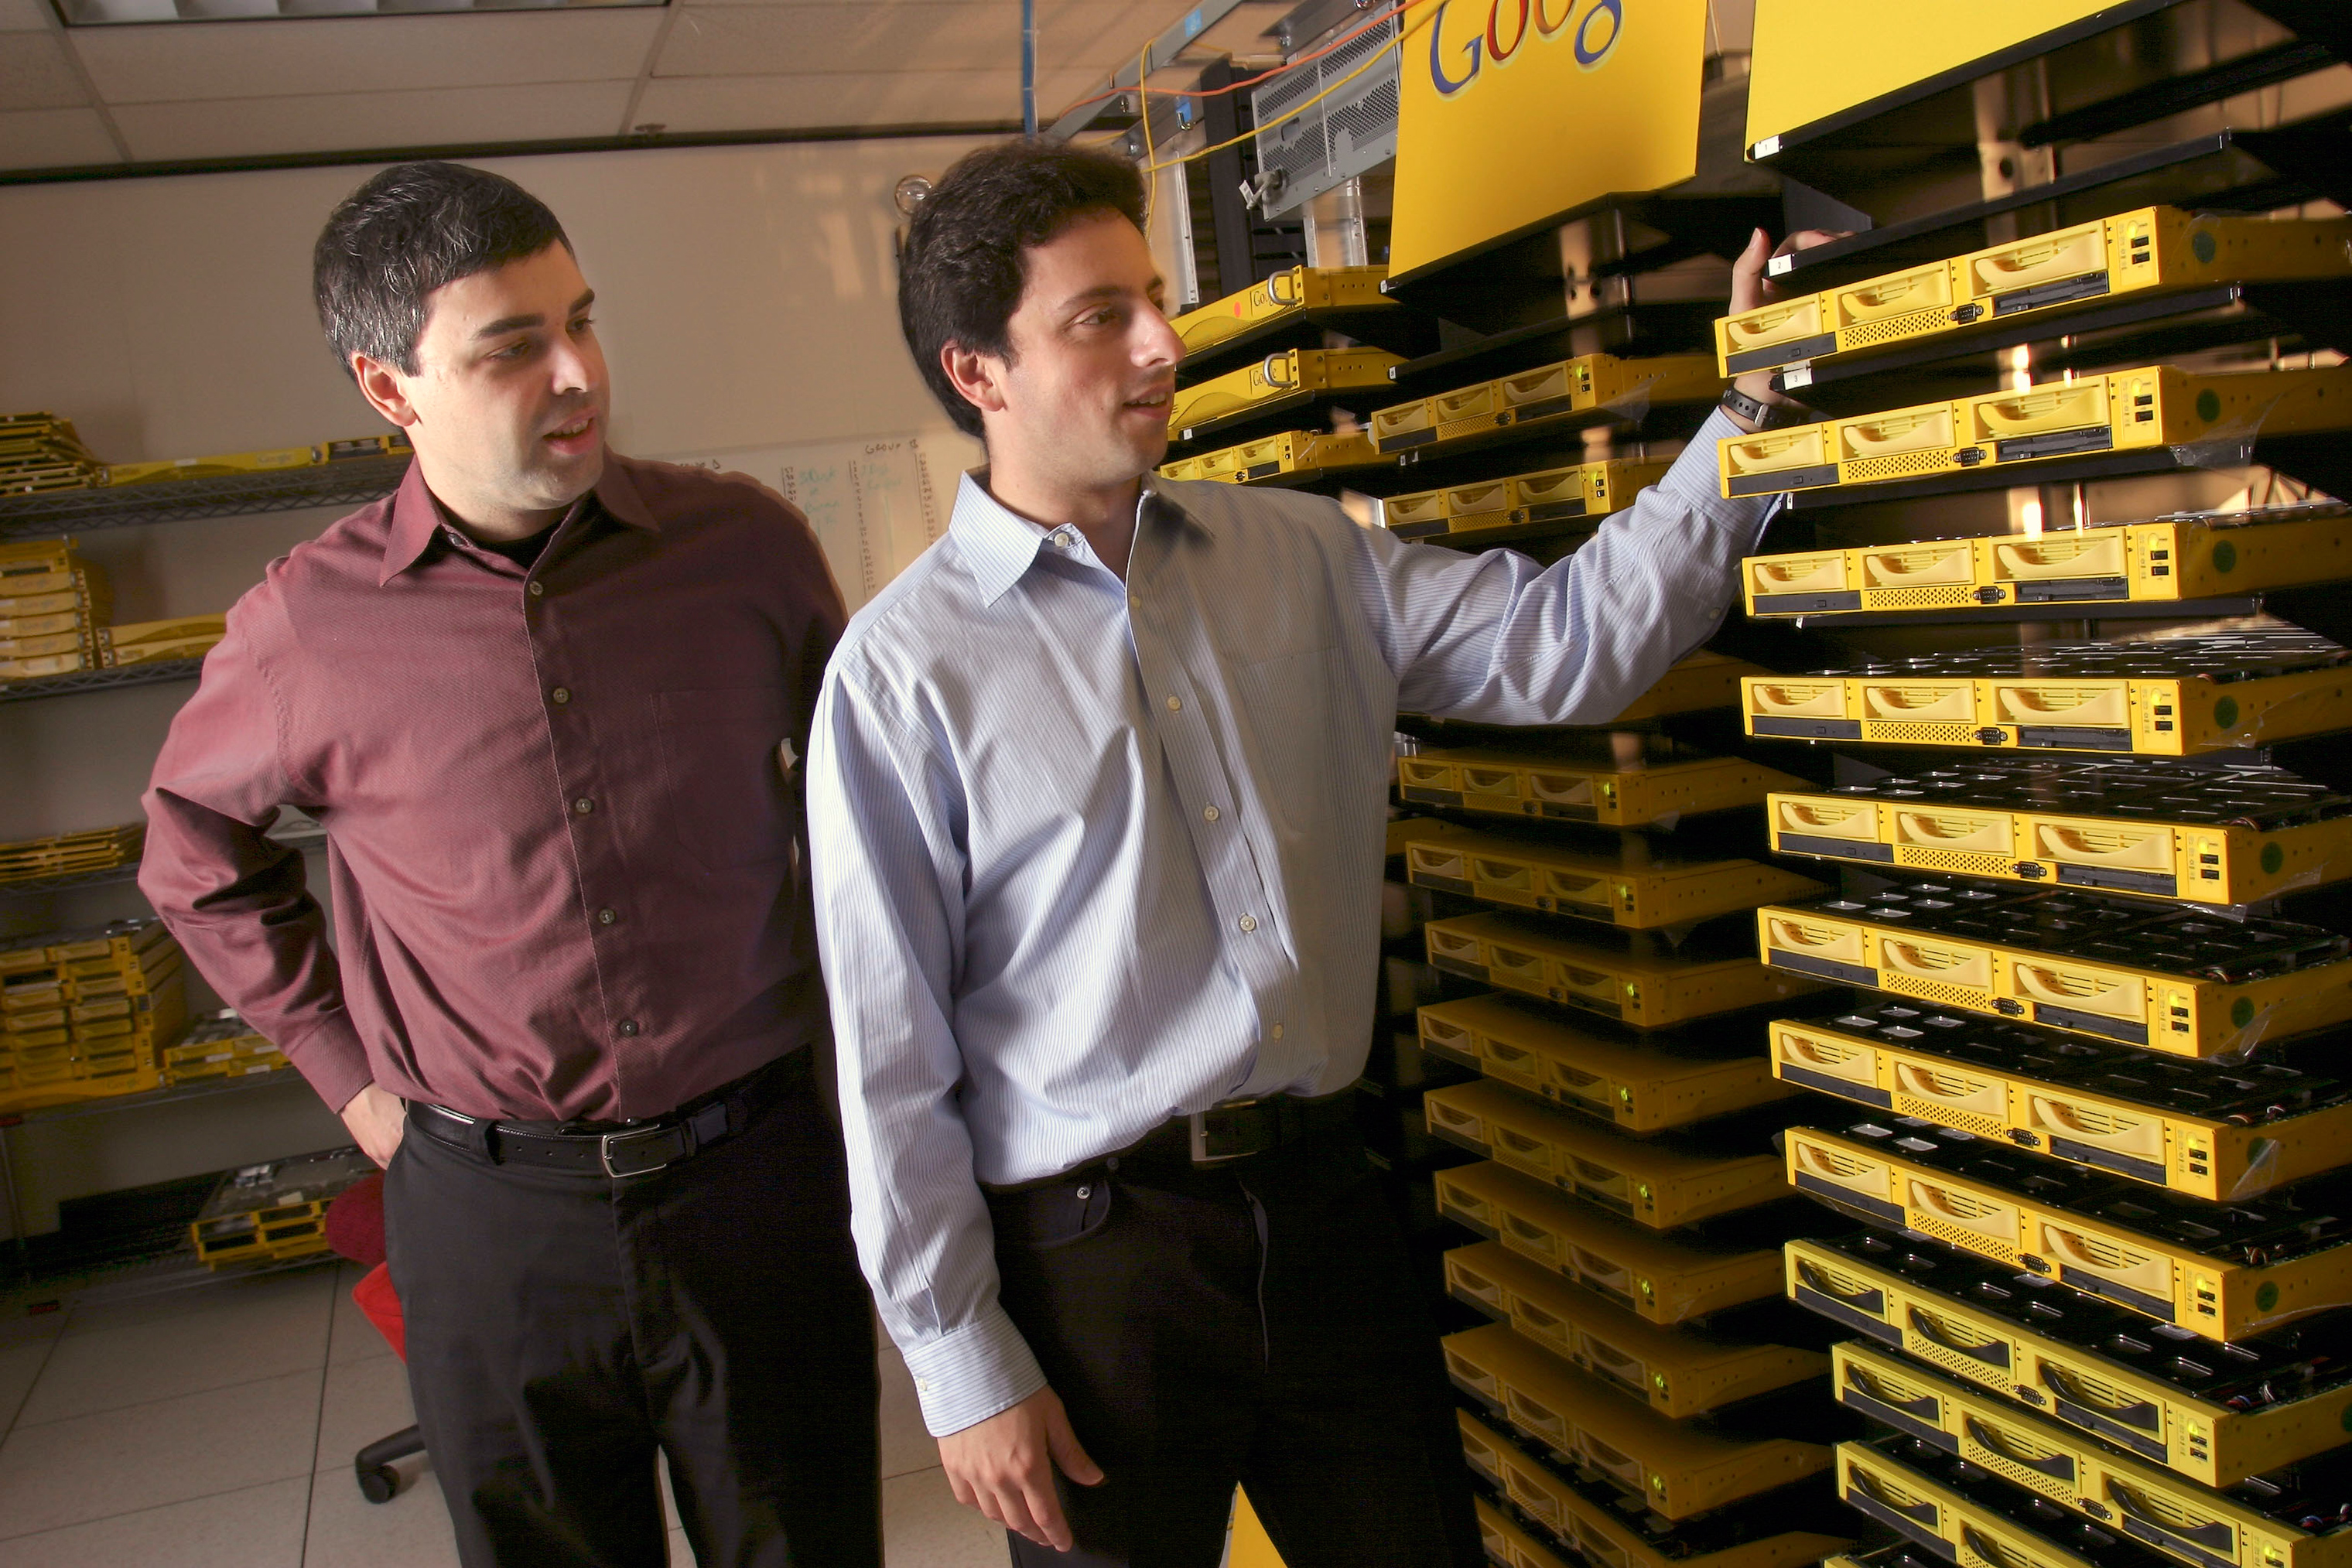 Google co-founders Larry Page, left, and Sergey Brin, at their campus headquarters in Mountain View, Calif., 2003. (Kim Kulish—Corbis/Getty Images)